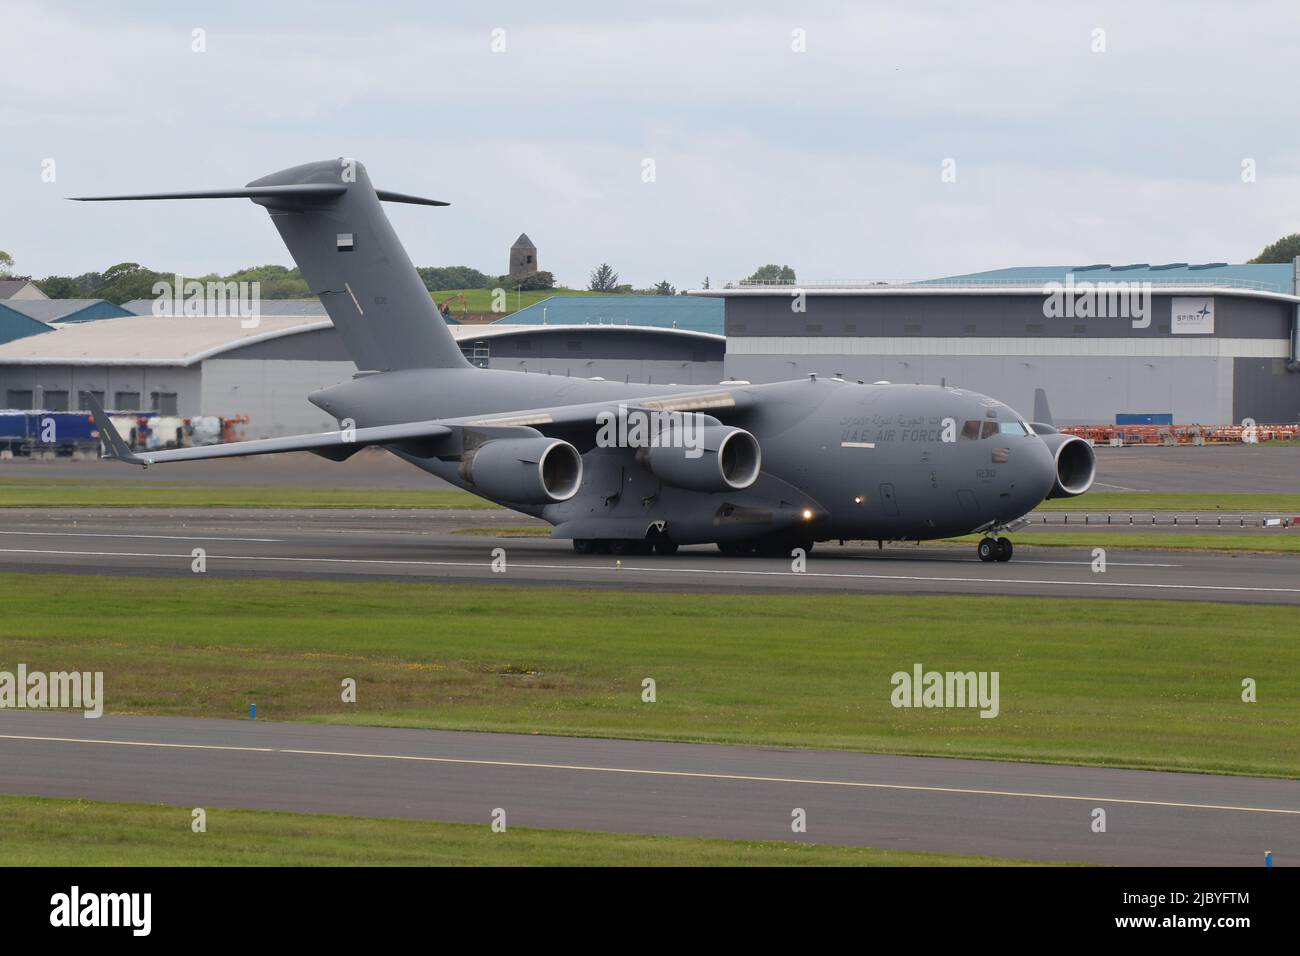 1230 (140008), a Boeing C-17 Globemaster III operated by the United Arab Emirates Air Force, departing from Prestwick International Airport in Ayrshire, Scotland. Stock Photo